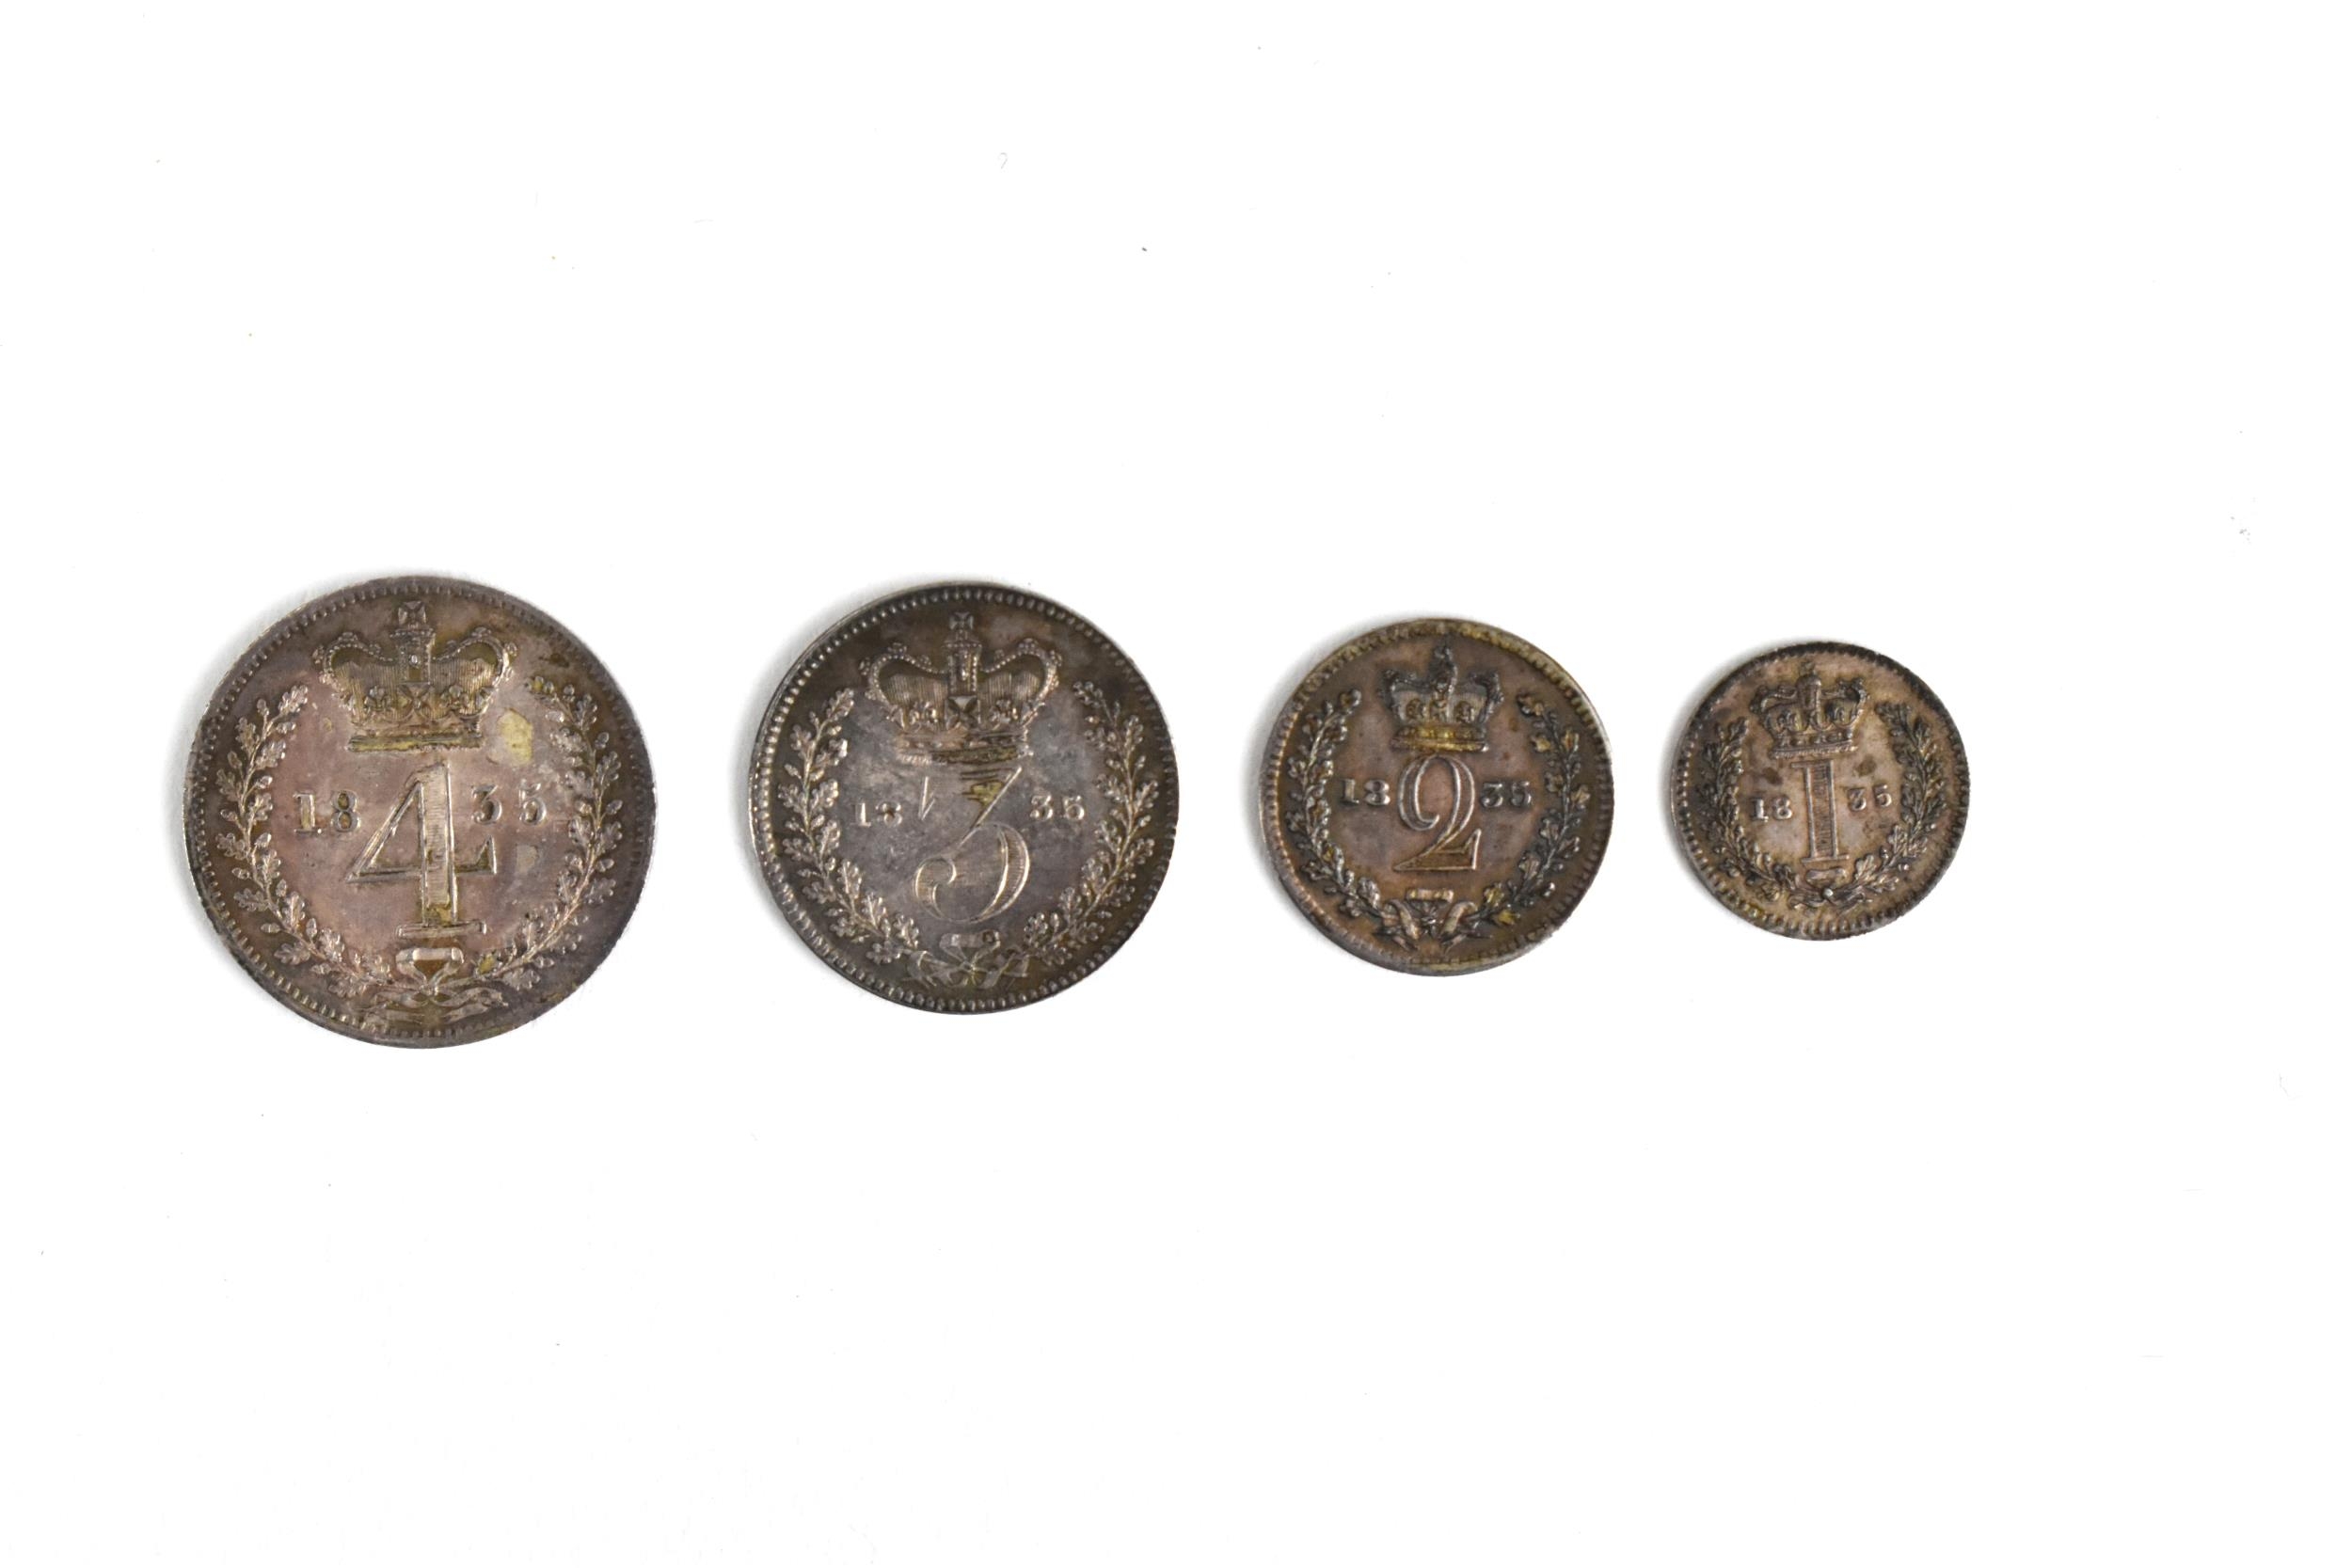 United Kingdom - William IV (1830-1837), Maundy Set, dated 1835, 4d, 3d, 2d and 1d - Image 4 of 6